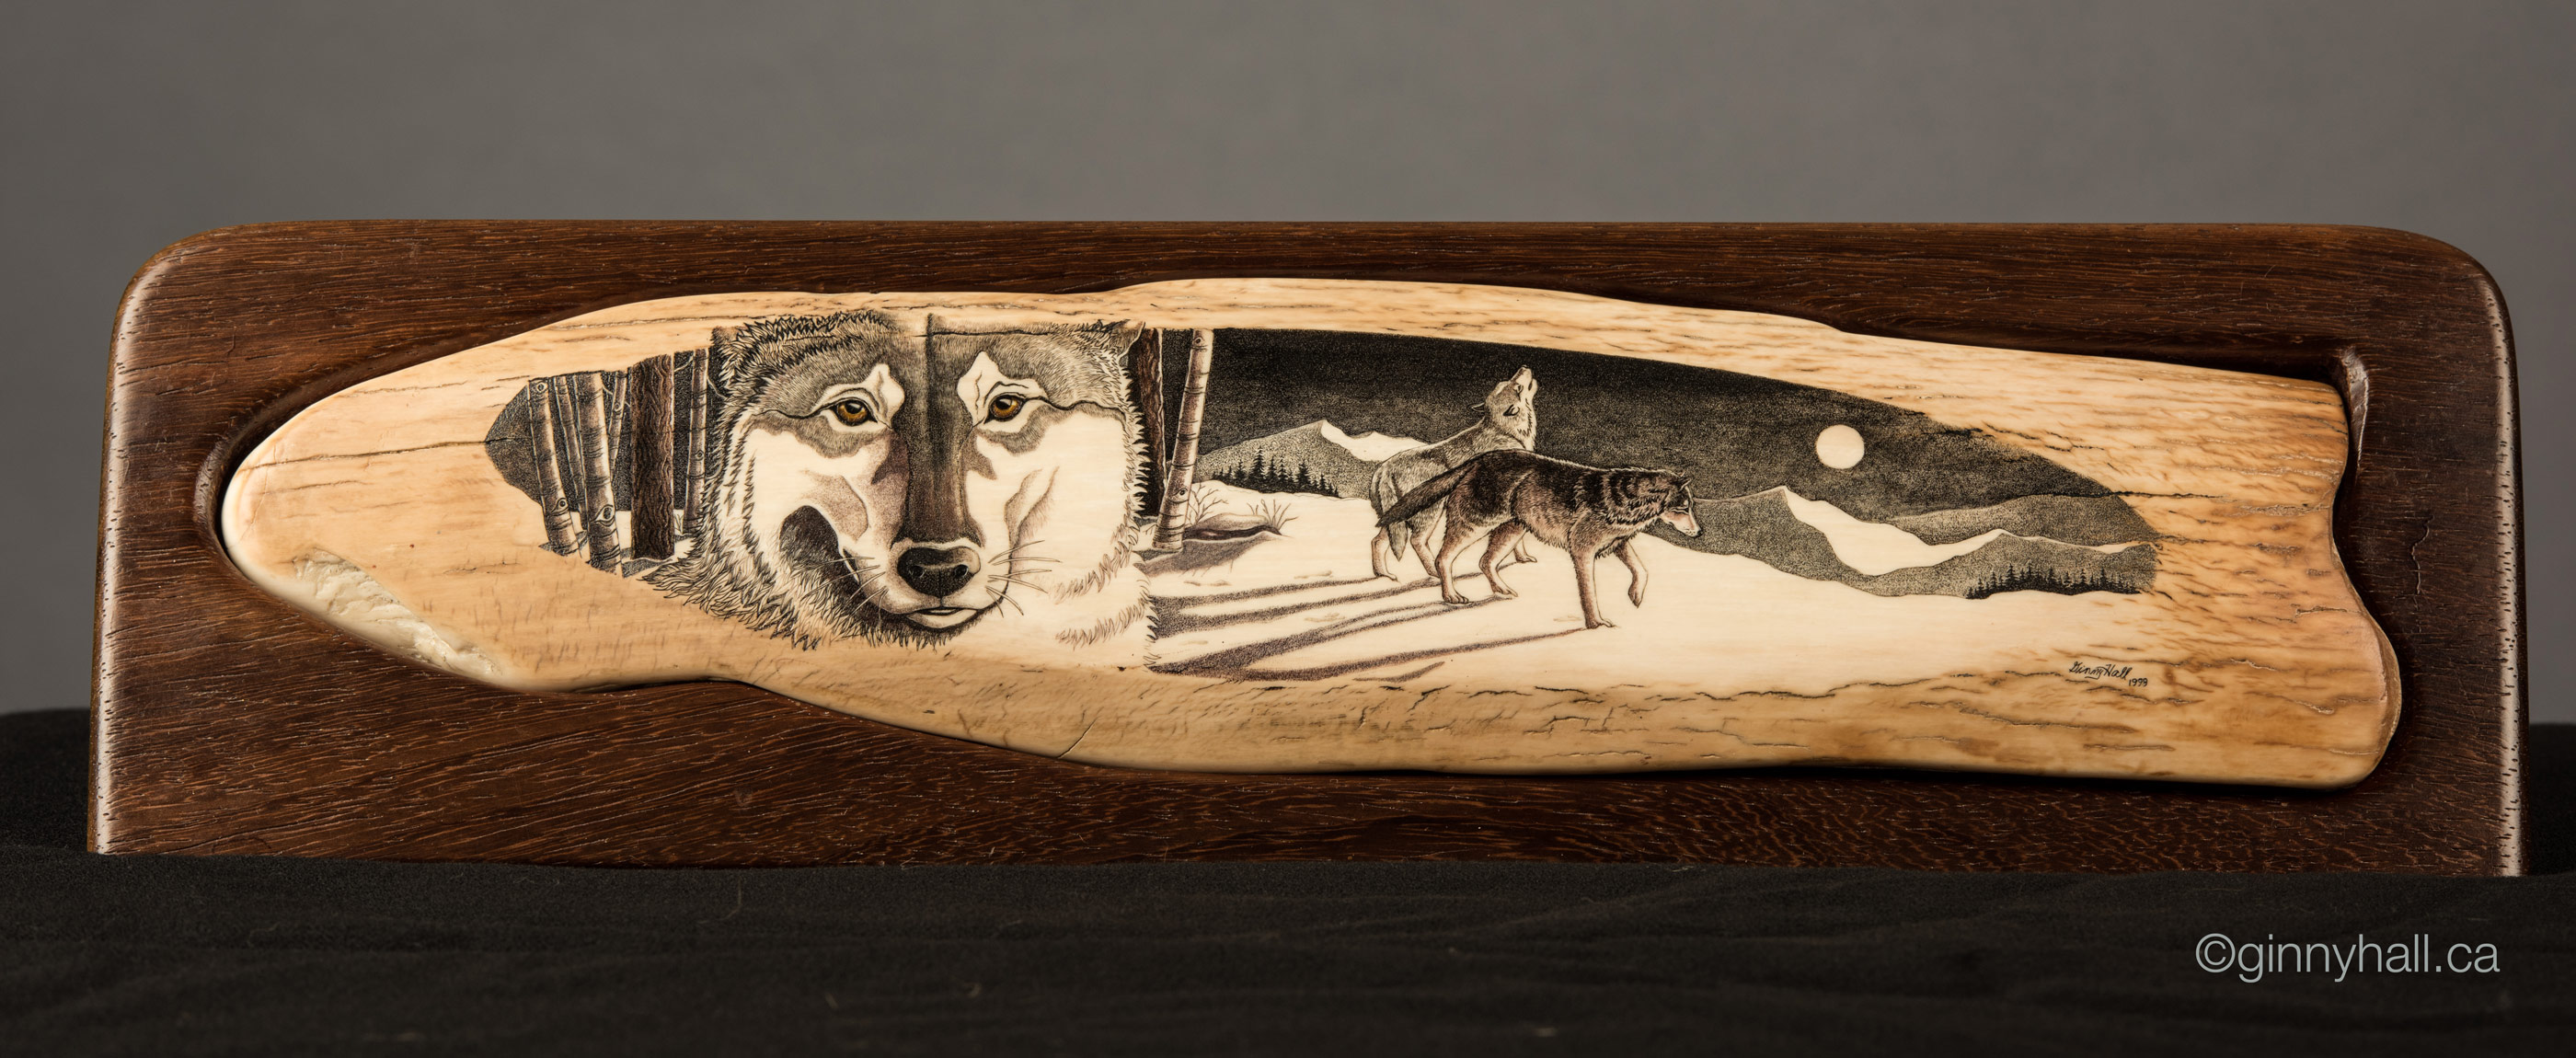 A scrimshaw peice by Ginny Hall depicting wolves in a snowy forest.